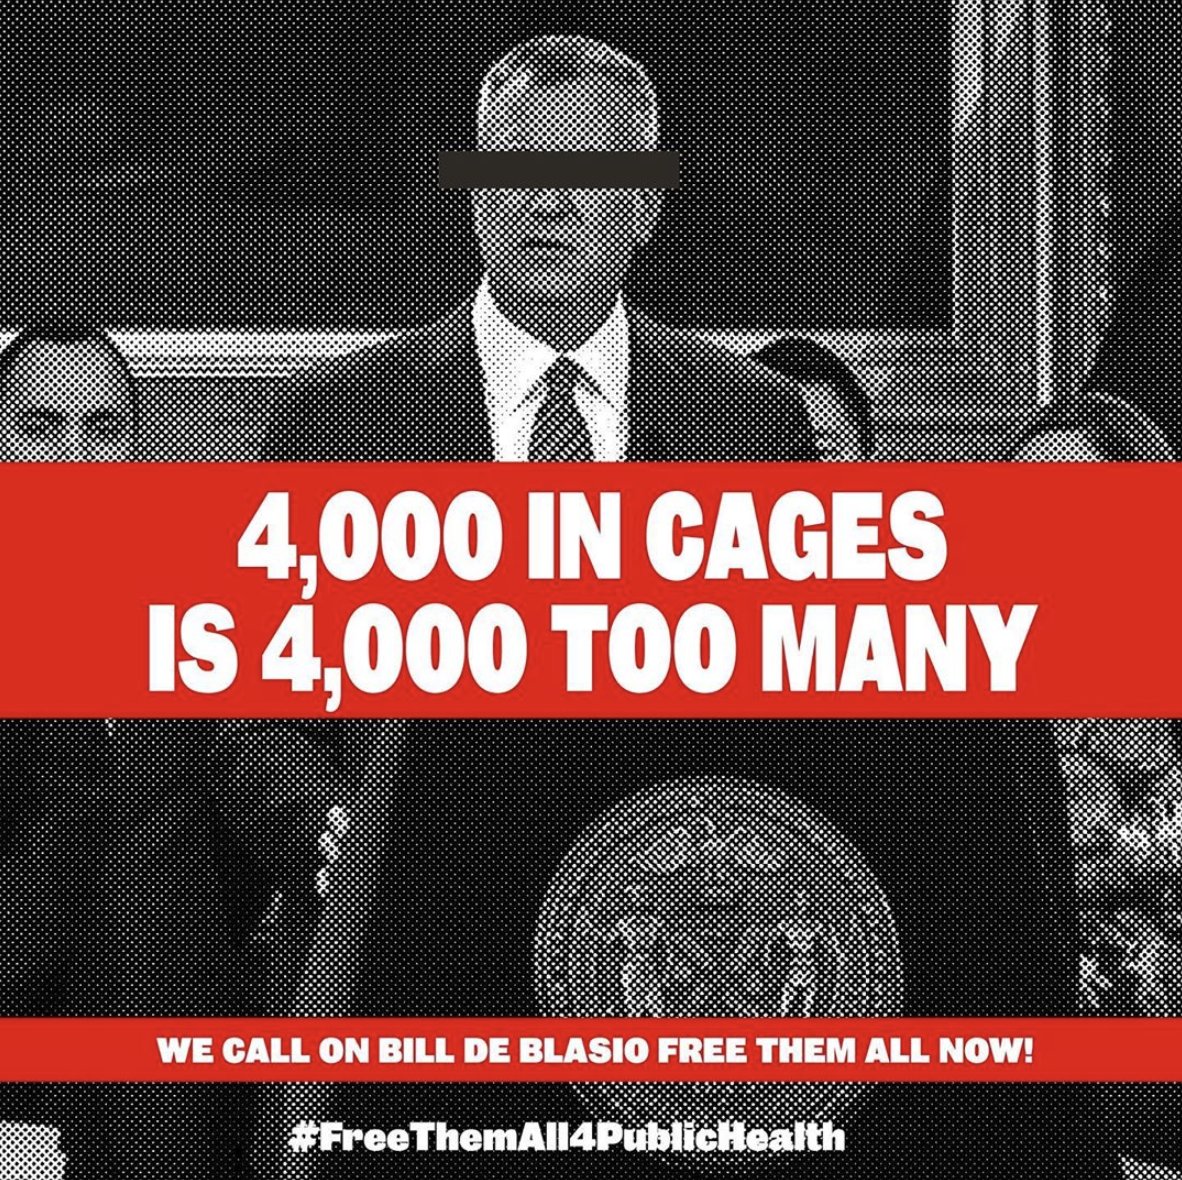 EARTH DAY ACTIONThe De Blasio administration has the power to release people! Use our tweet/email/call scripts to demand de Blasio  #FreeThemAll4PublicHealth:  https://bit.ly/2VsMRU3 EMAIL: bdeblasio@cityhall.nyc.govFAX: (212) 406-3587TWEET:  @NYCMayor